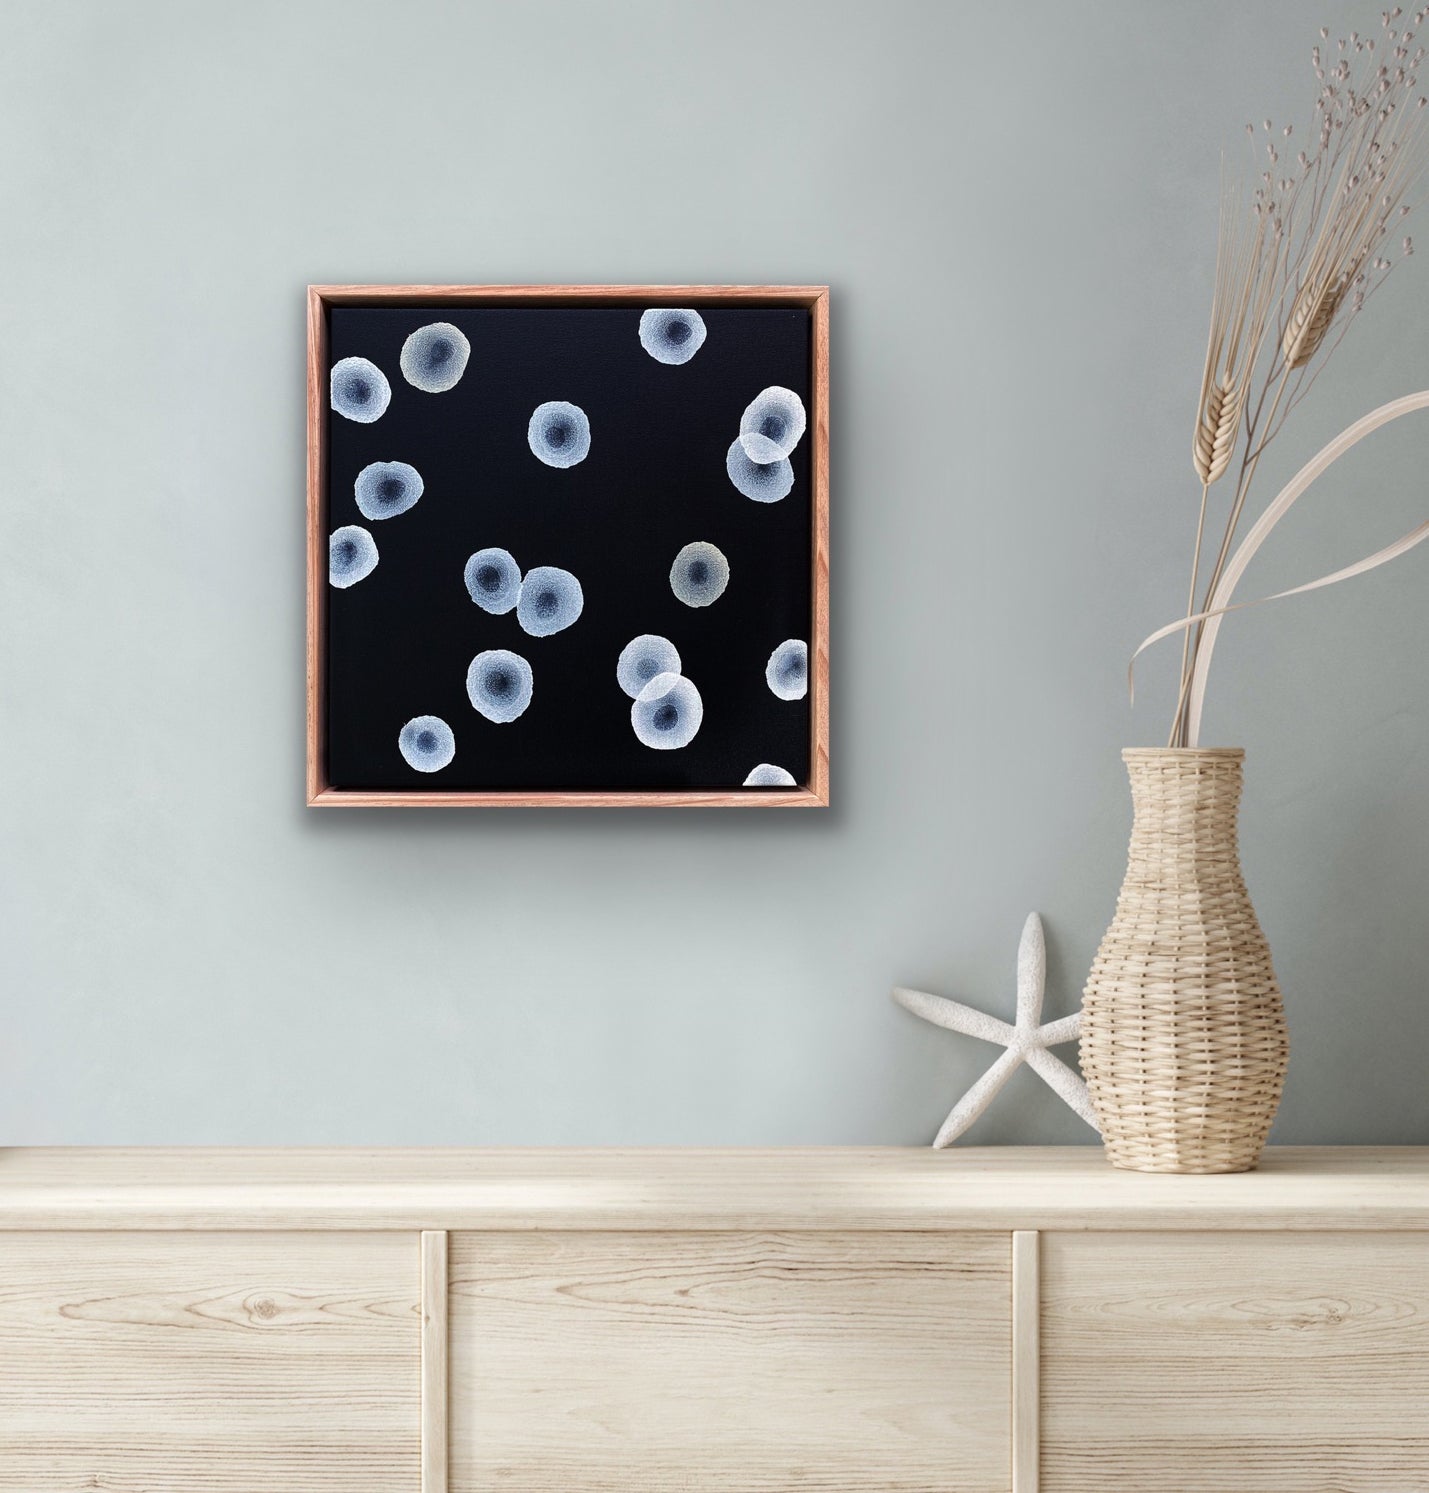 Orbicular Echo IV - Abstract Monochrome Painting